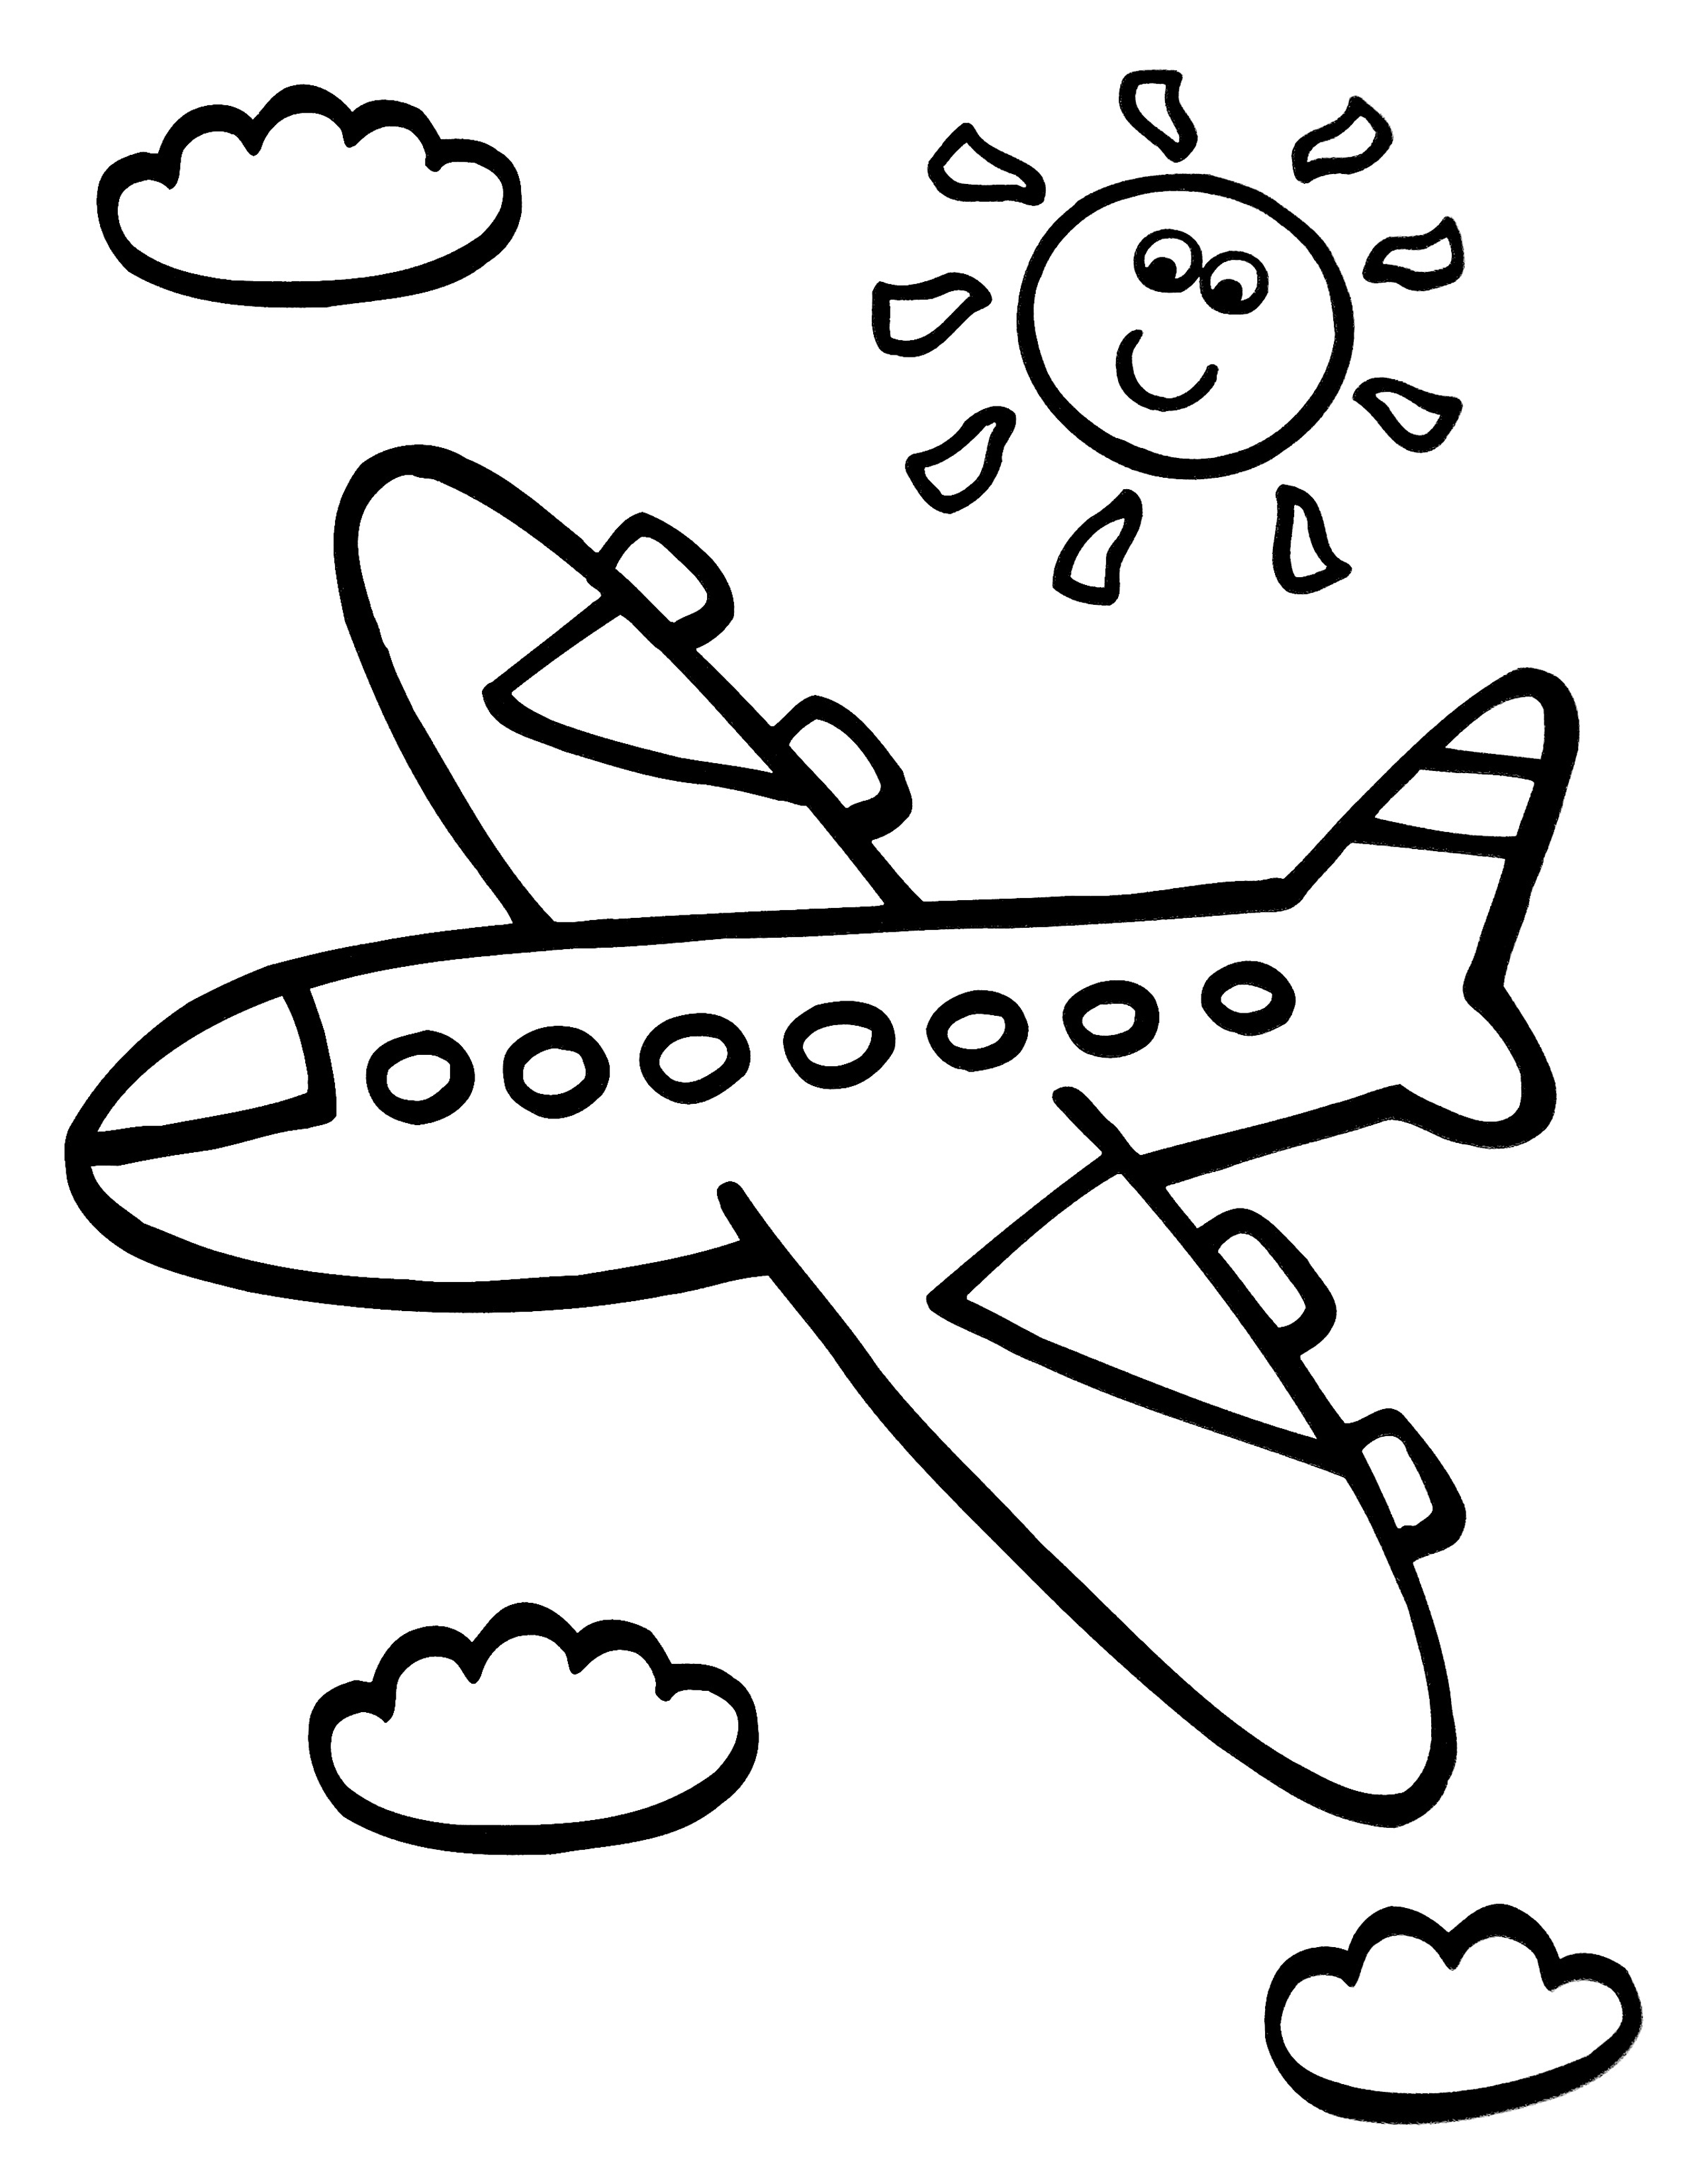 Airplane Coloring Page – Kimmi The Clown